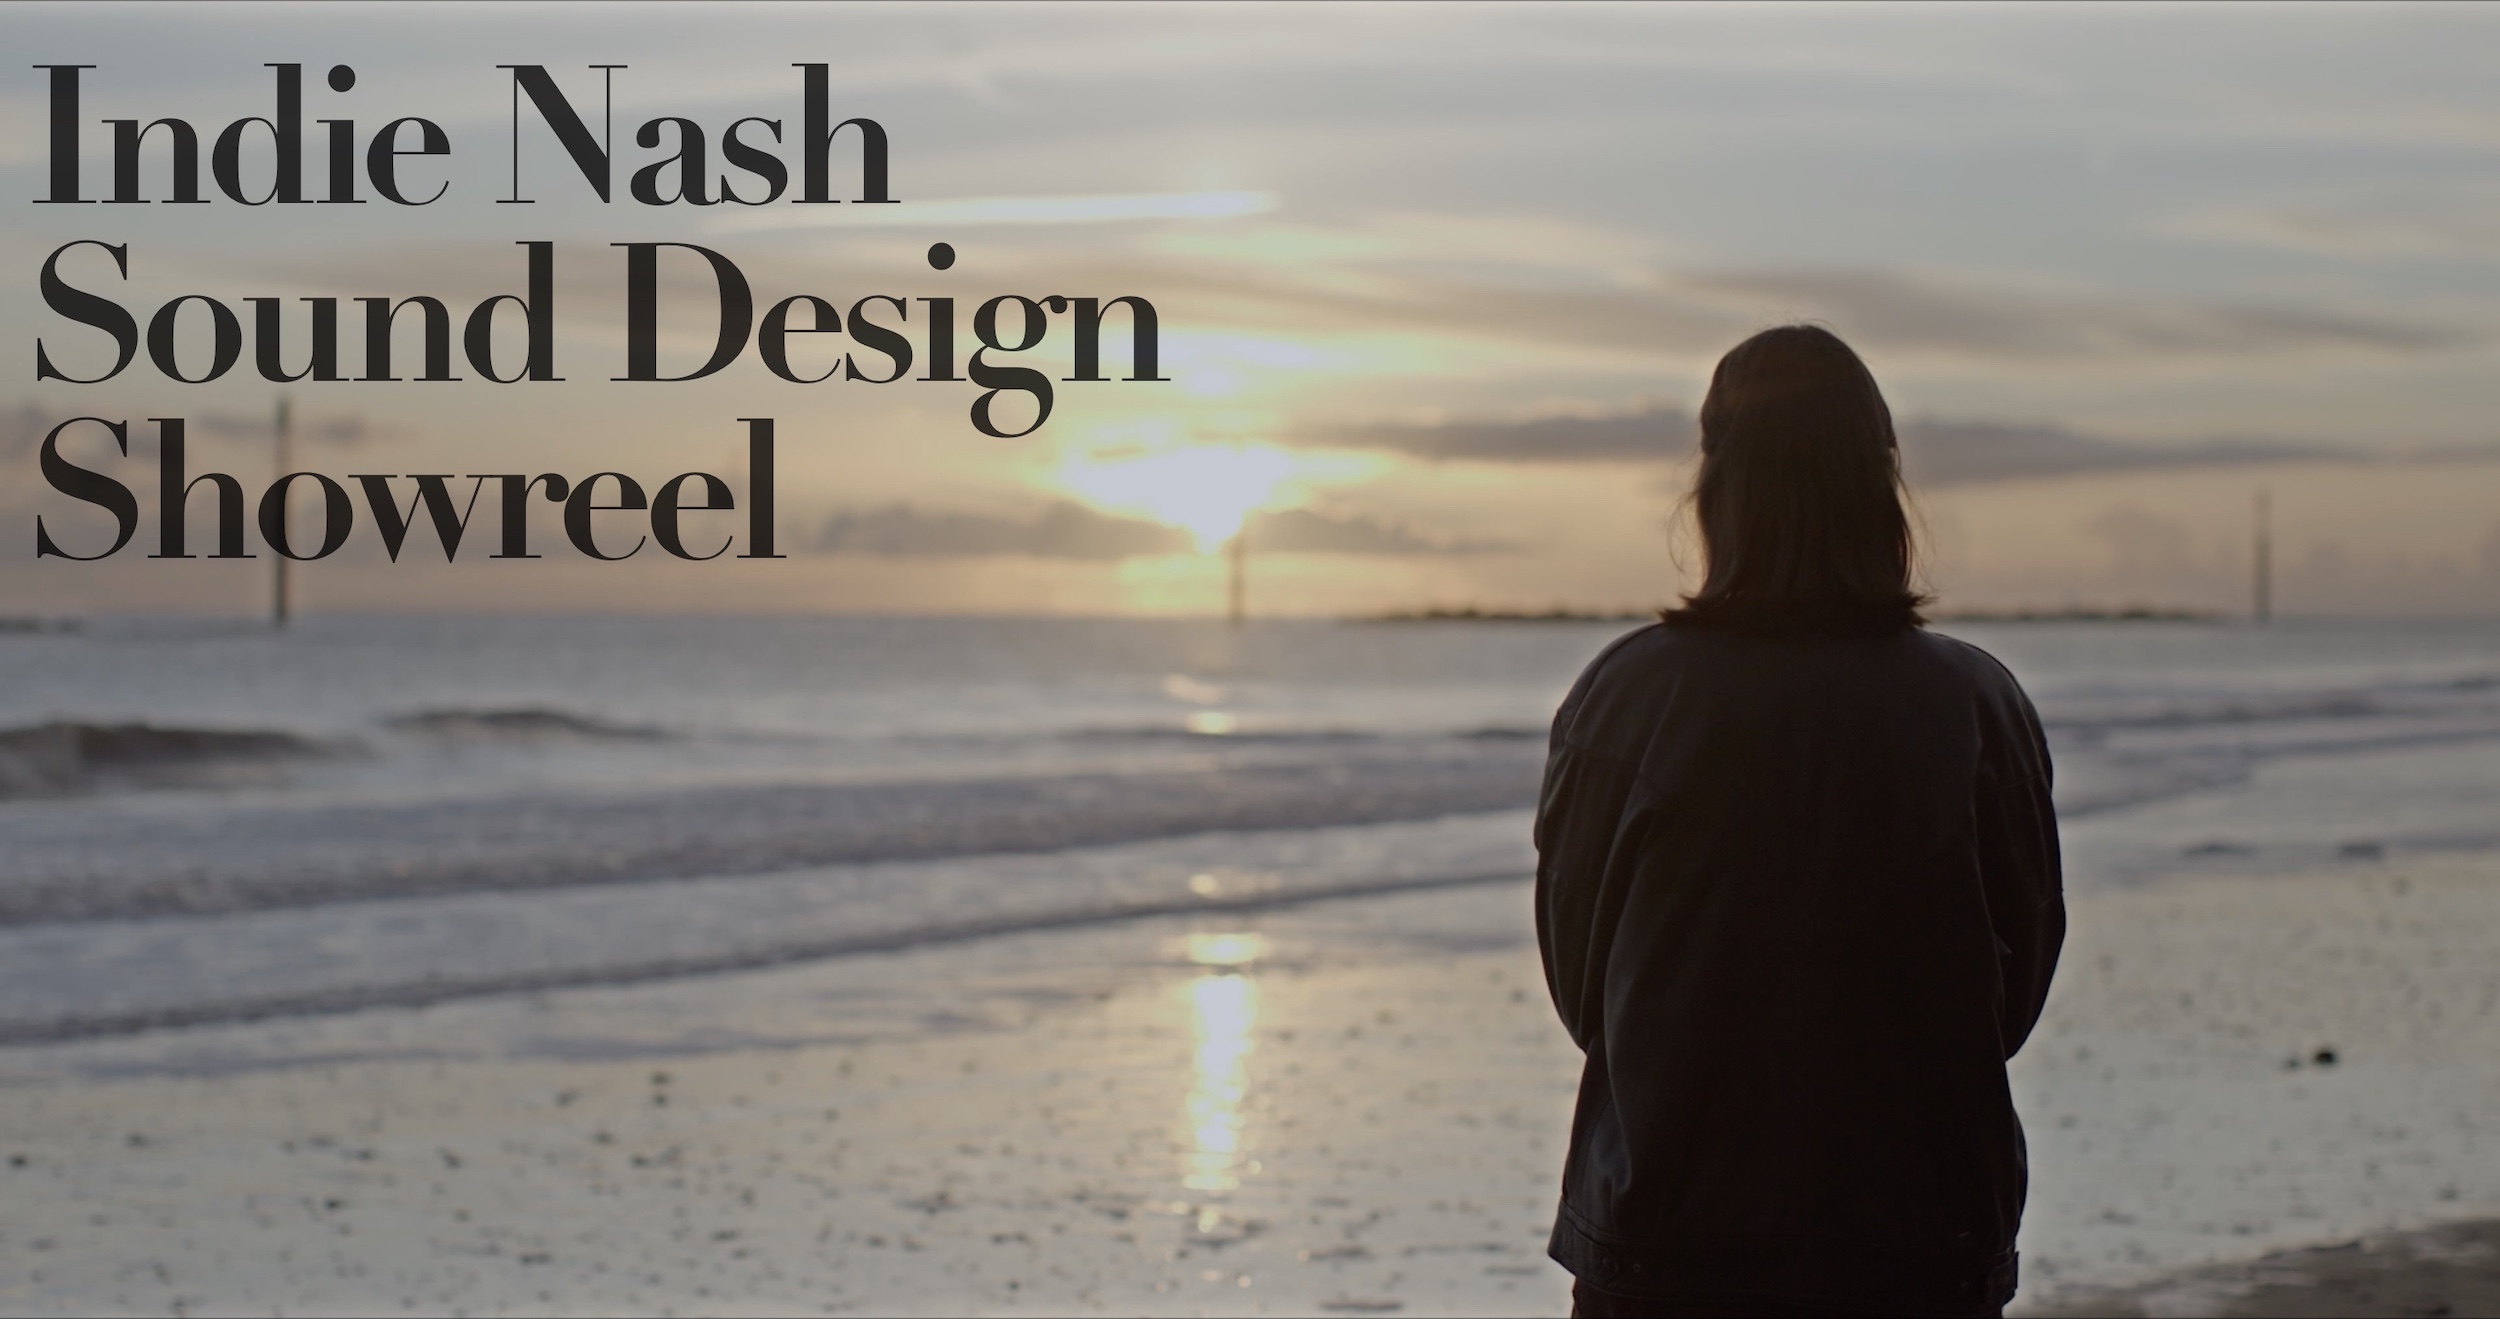 Link image to showreel by Indie Nash showing a variety of films featuring a silhouetted figure standing on a beach.